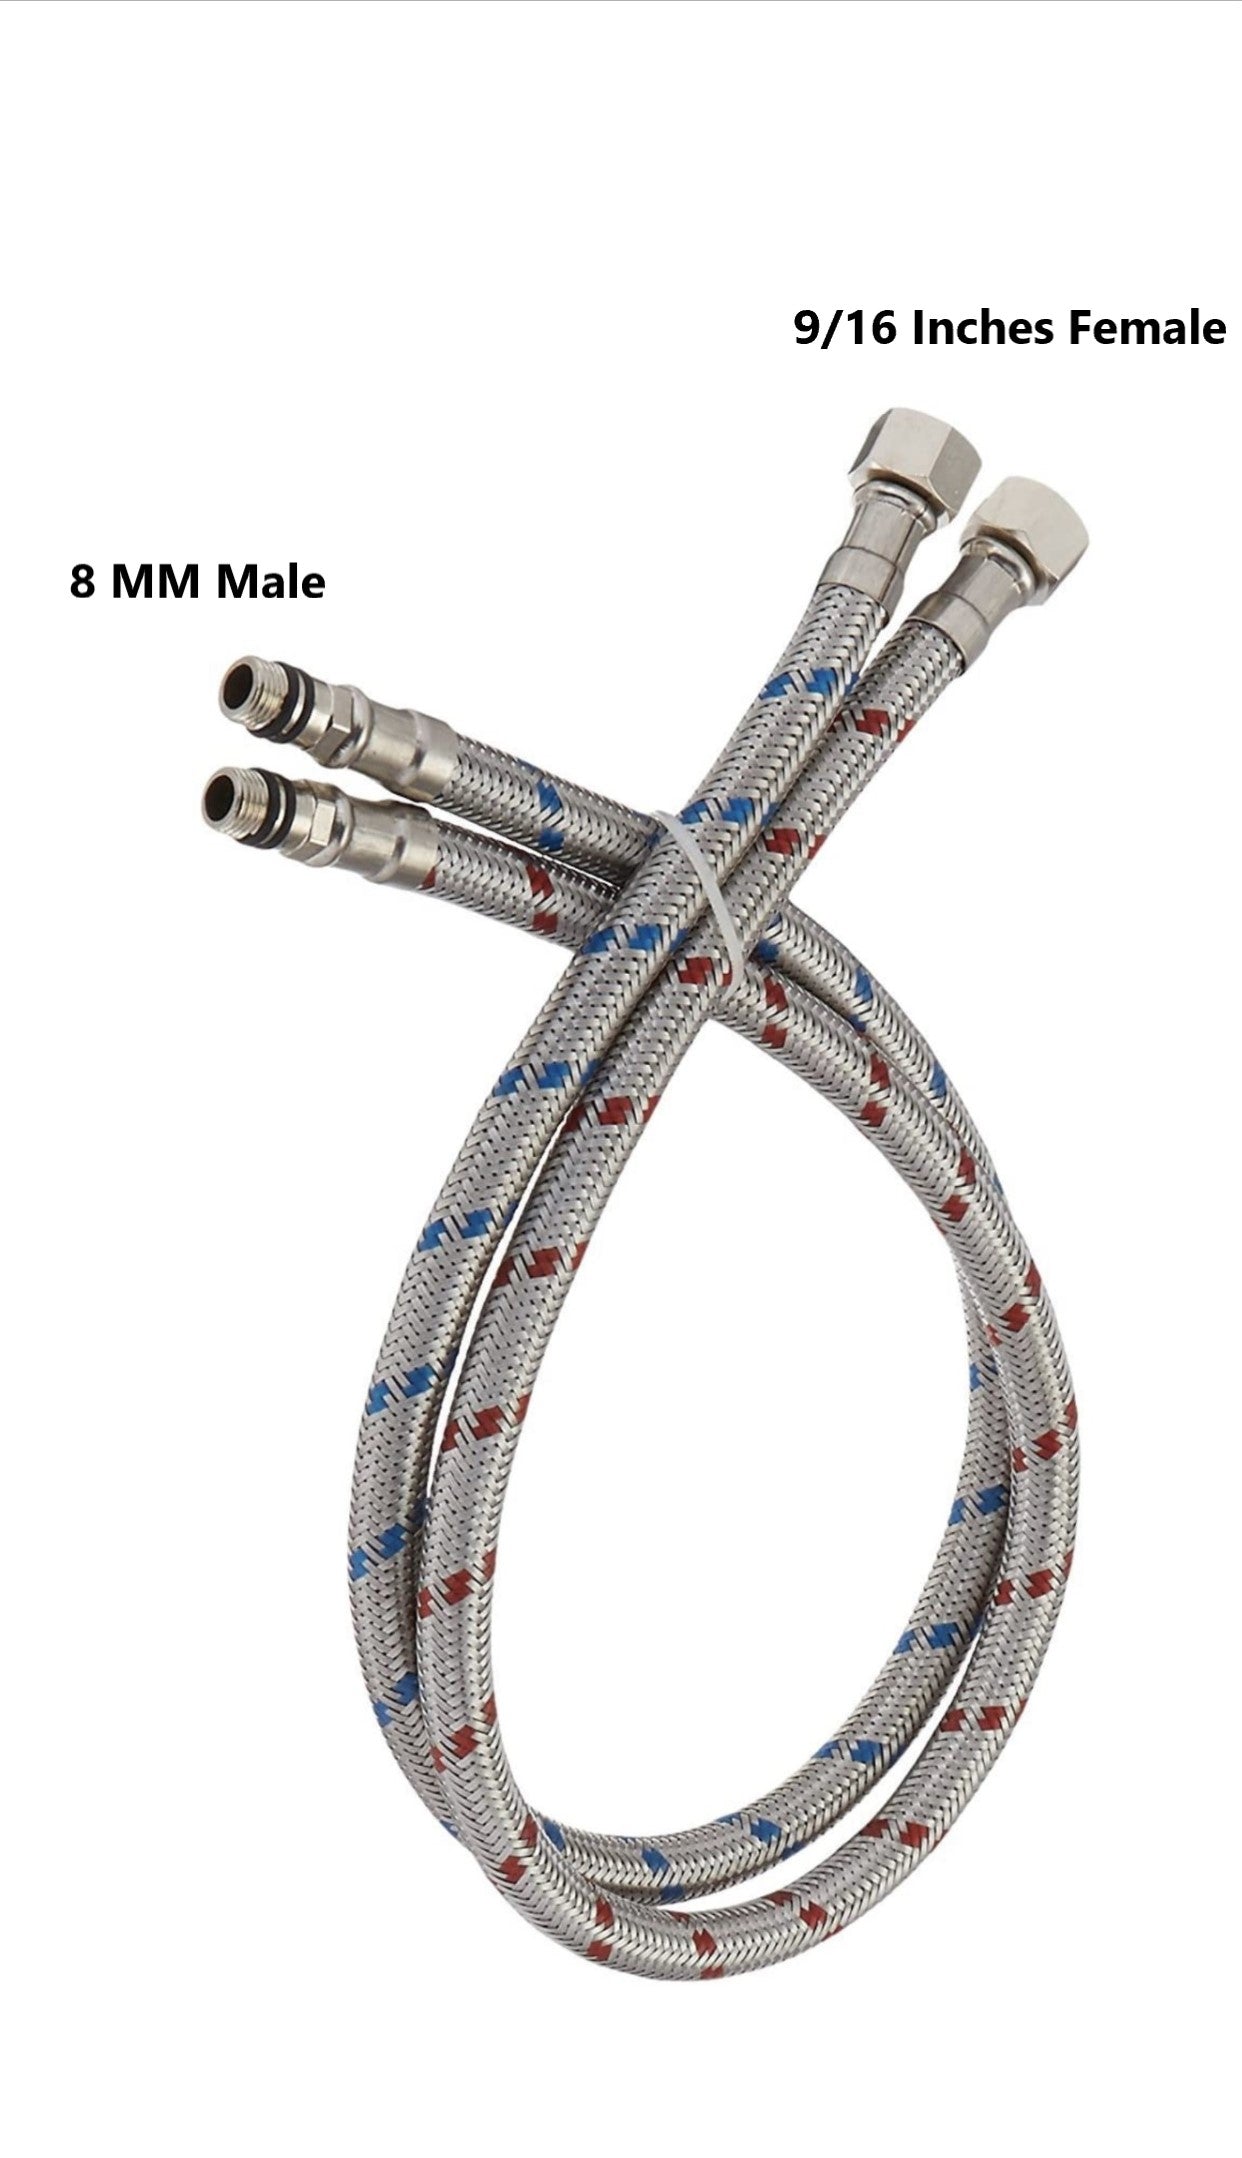 Braided Stainless Steel Water Supply Hoses Faucet Connector 31" Length 8MM Male, 9/16 Inches Female